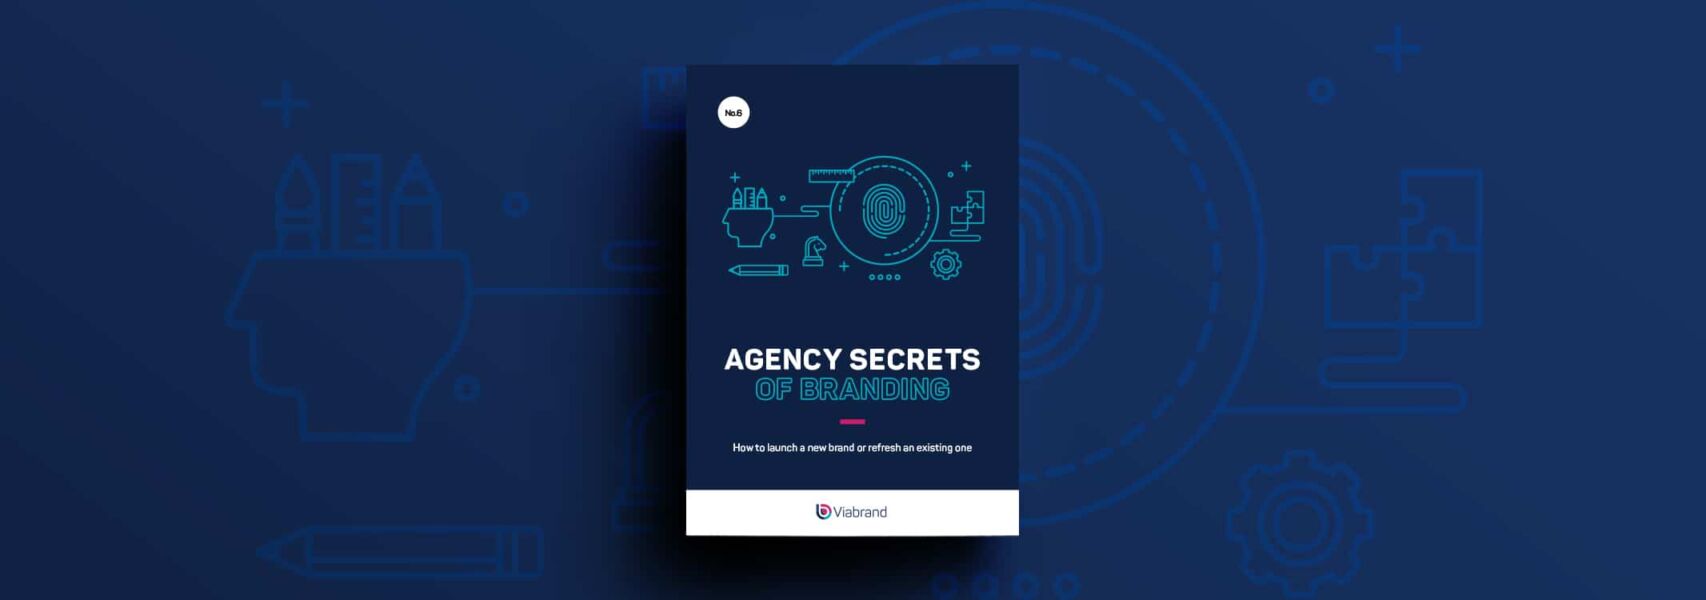 Discover branding secrets for a successful business with Agency Secrets - unlock insider tips for a unique brand identity.